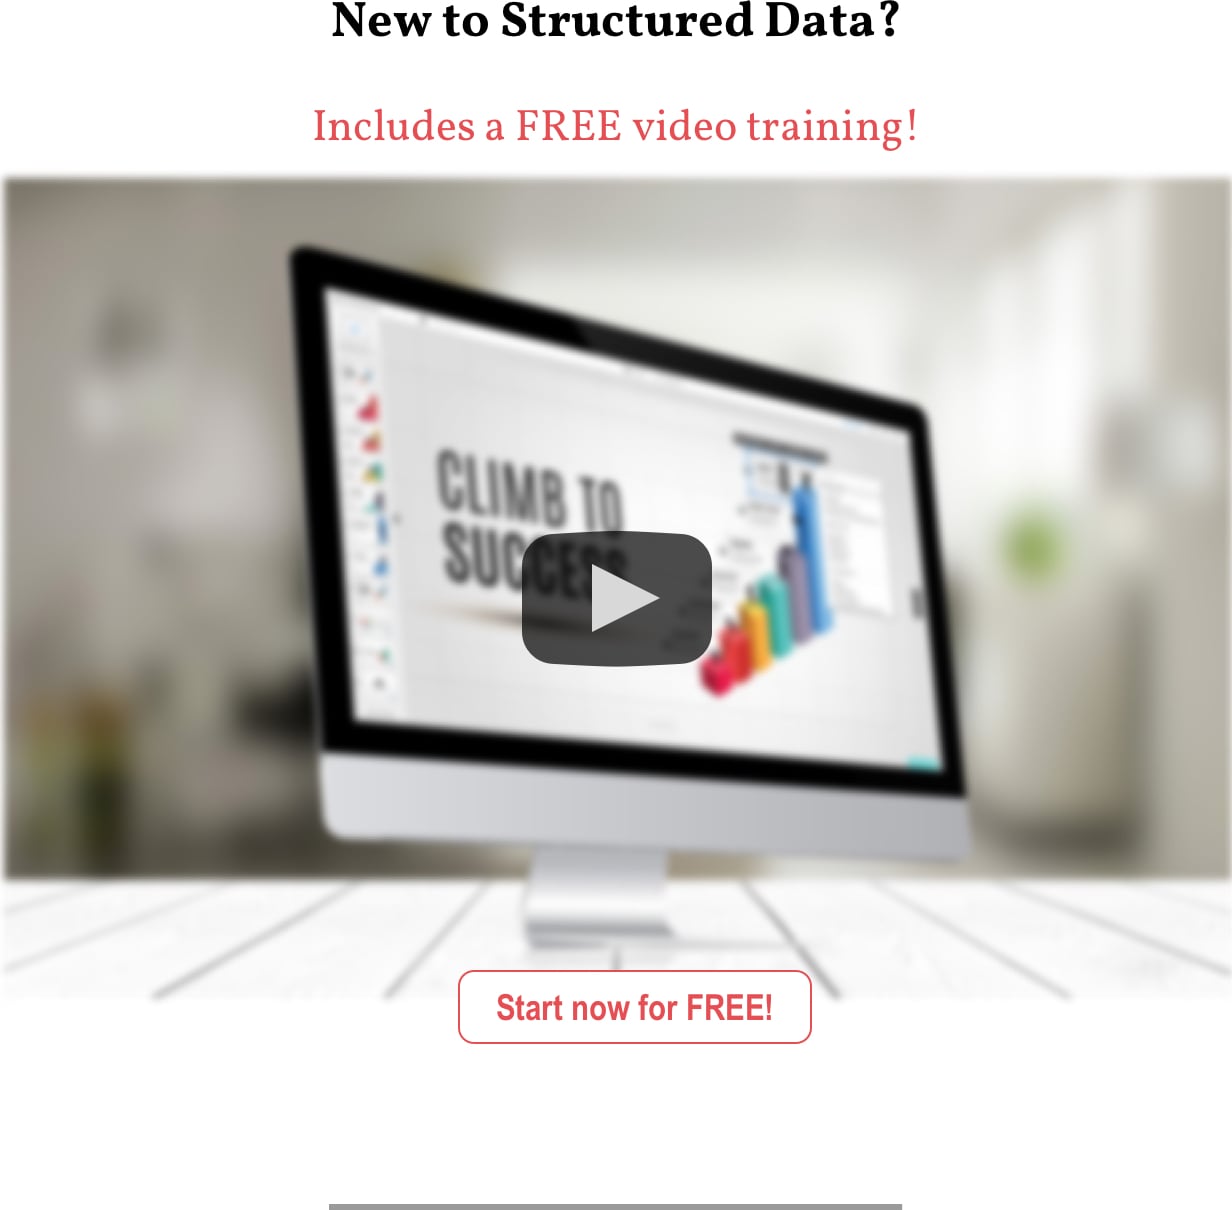 New to Structured Data? The plugin includes a free training!